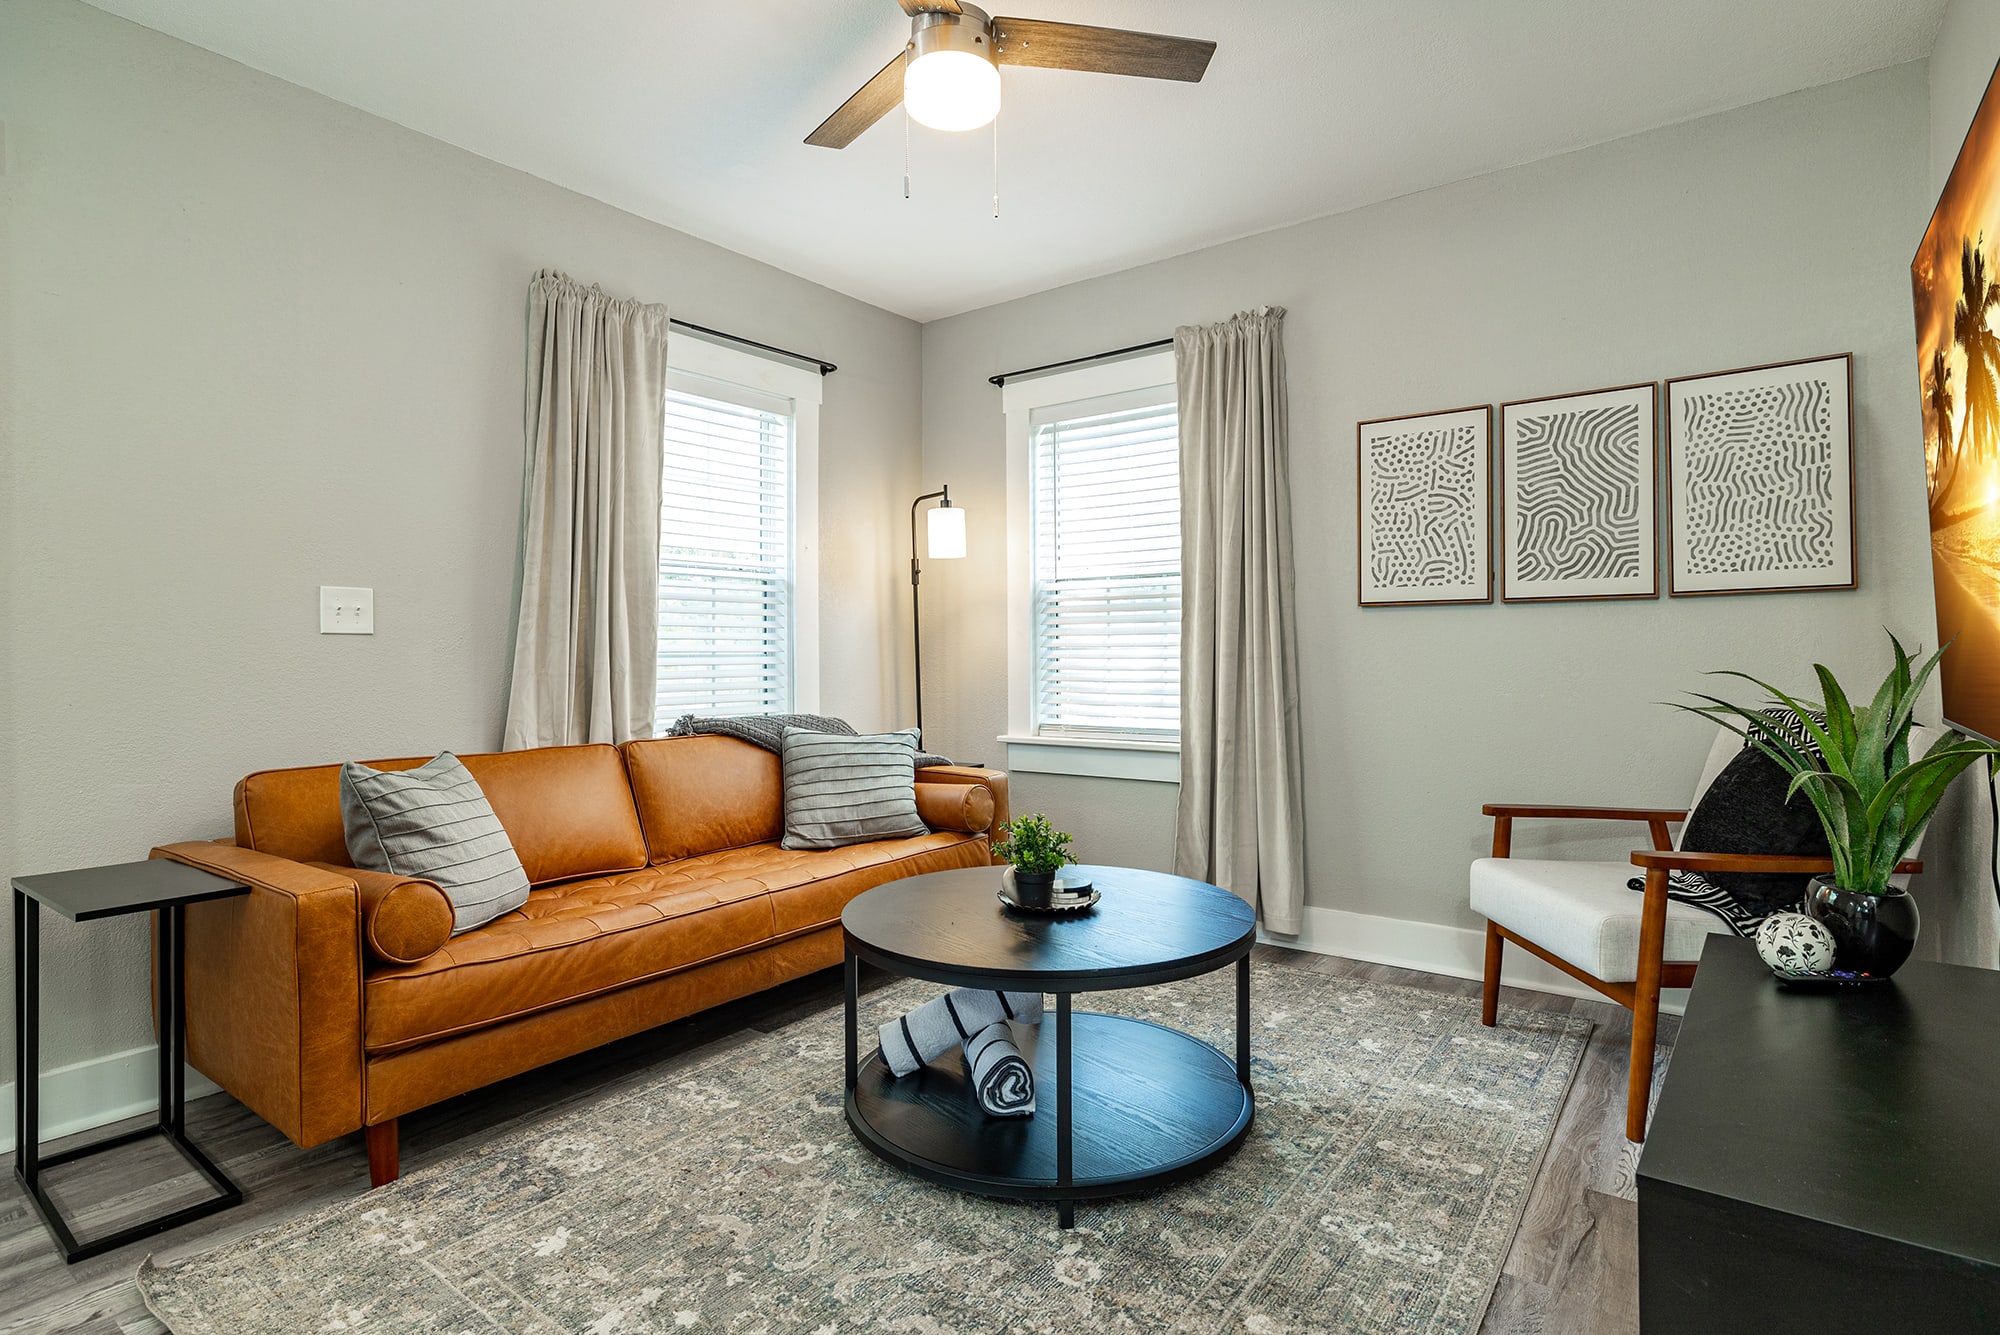 Relax after a long day downtown in our cozy and updated living space!